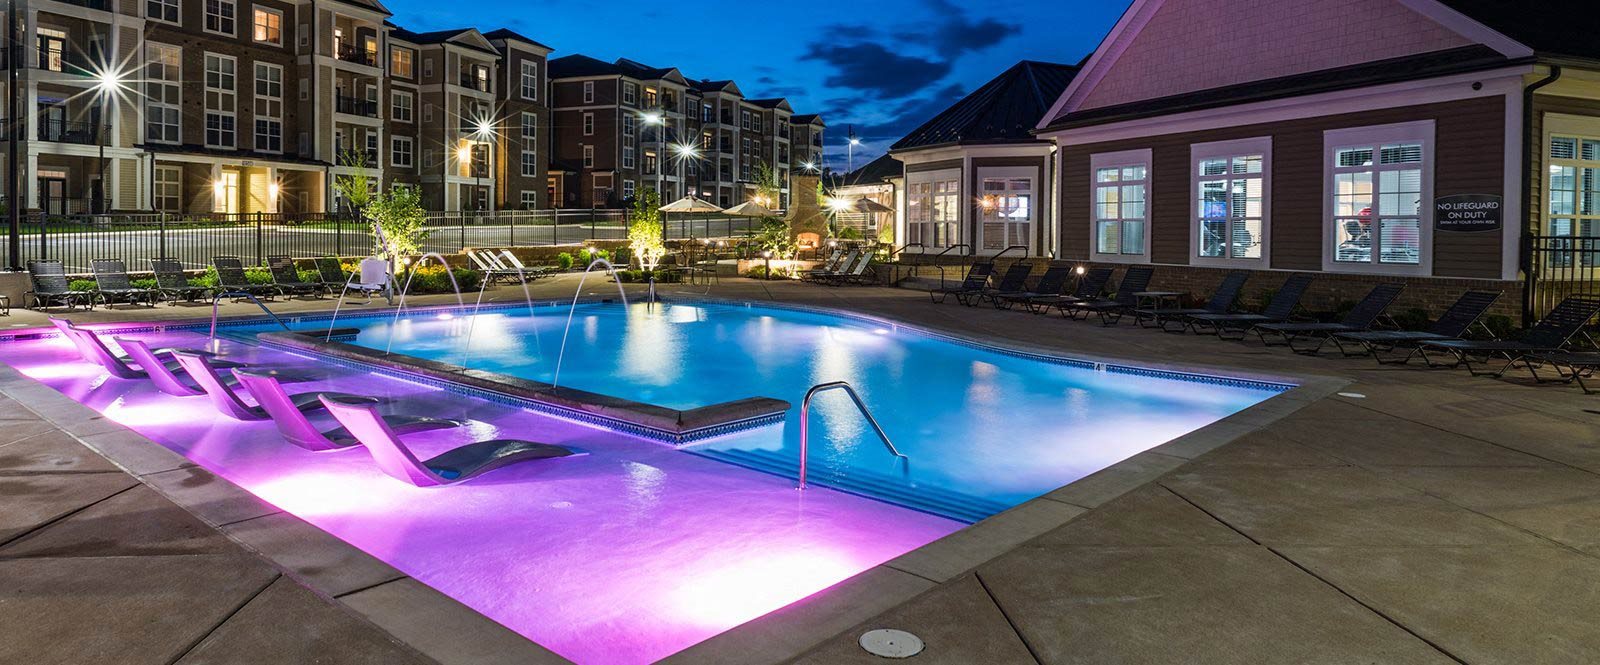 Sparkling Swimming Pool at Abberly at Southpoint Apartment Homes by HHHunt, Fredericksburg, 22407